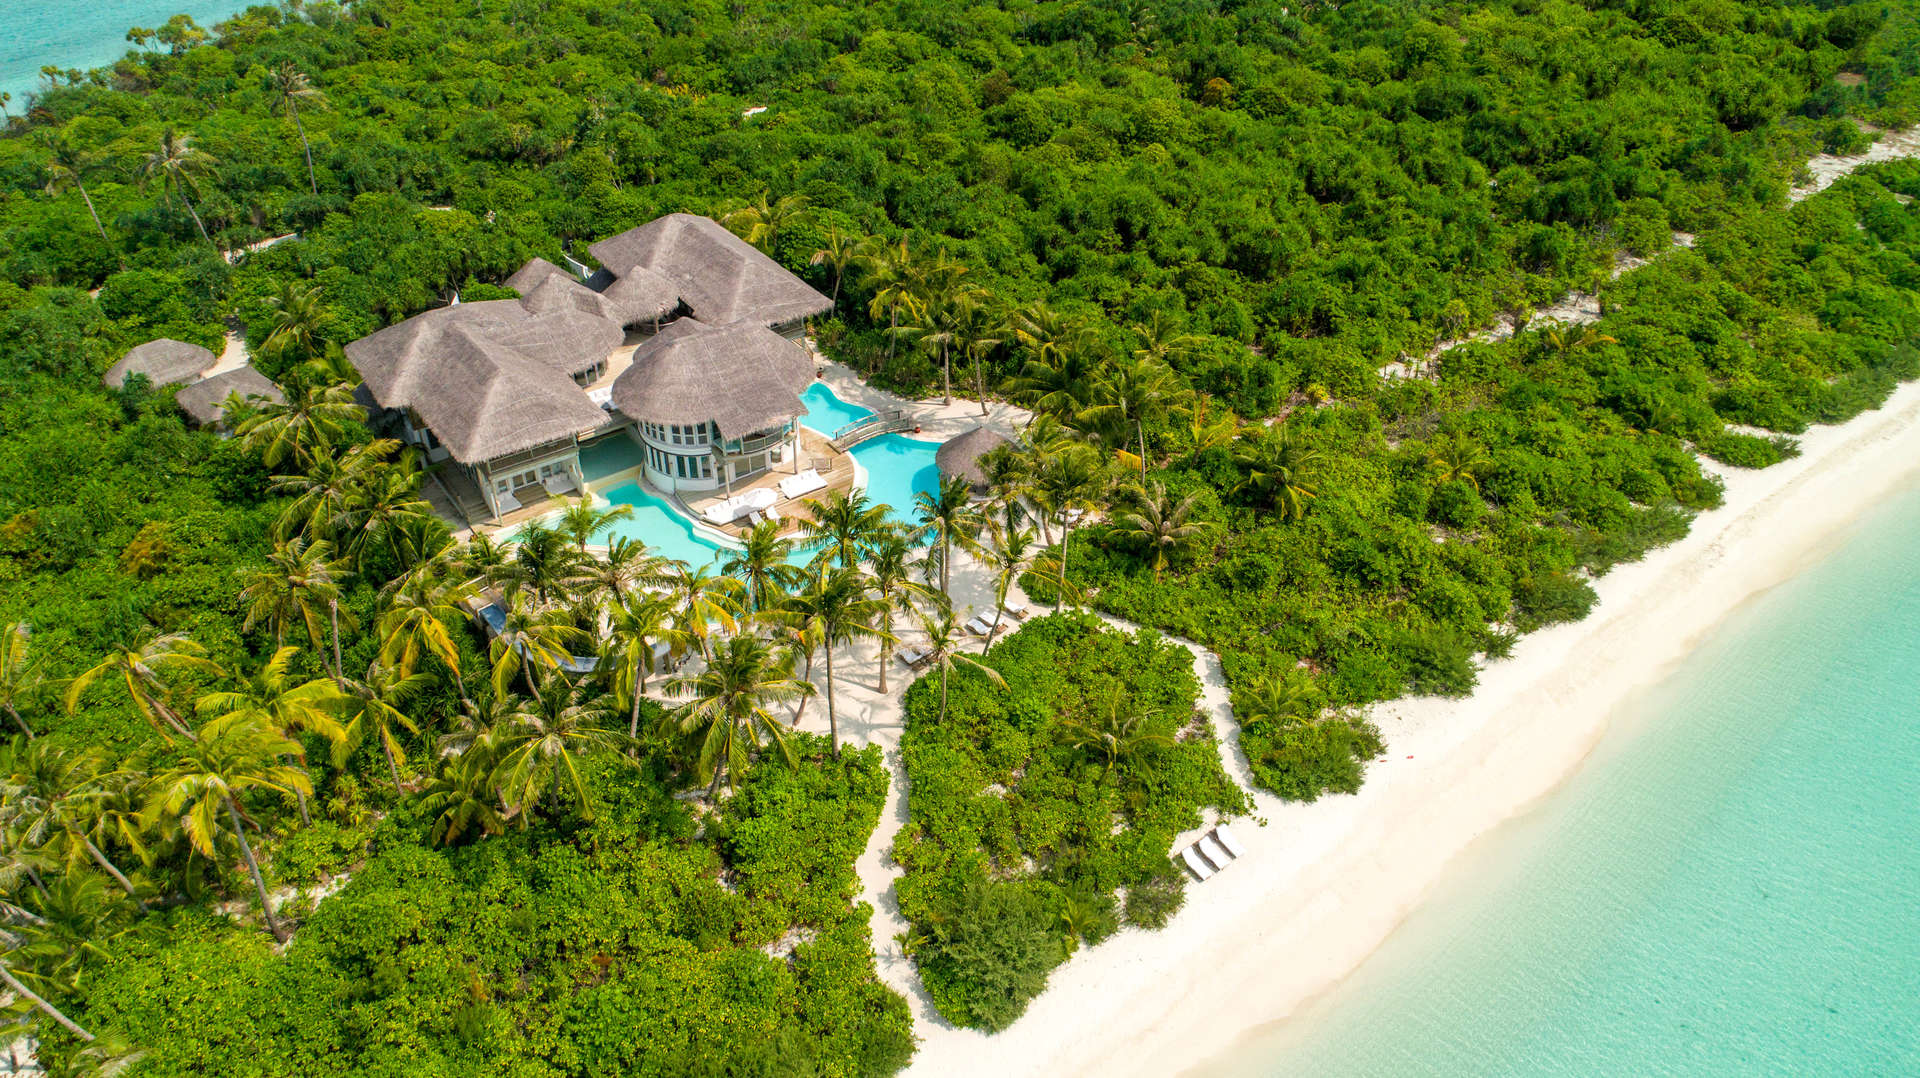 Rental Escapes island reserve with slide in the Maldives